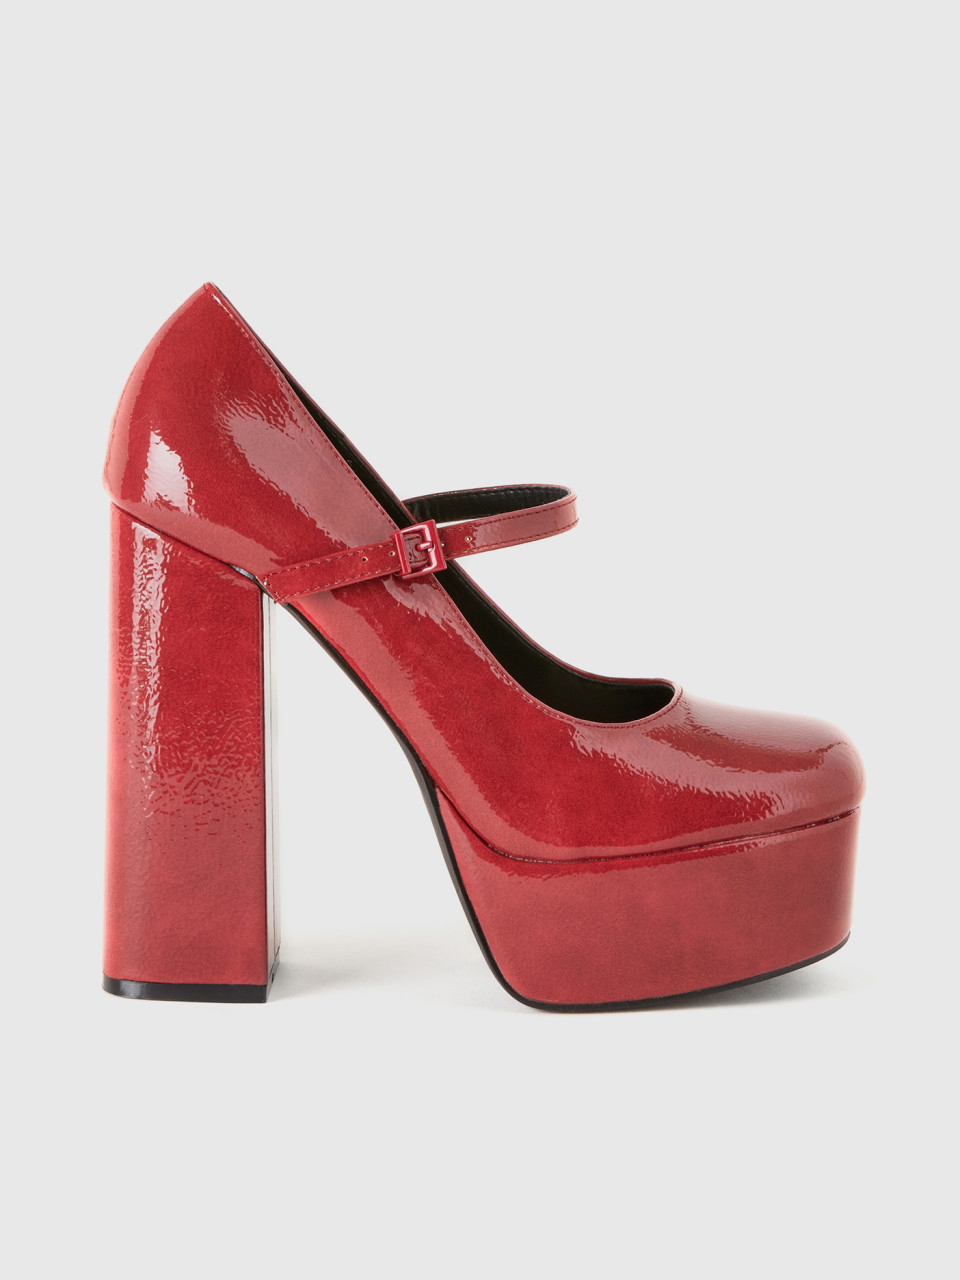 Benetton, Glossy Pumps With Heel And Buckle,5, Red